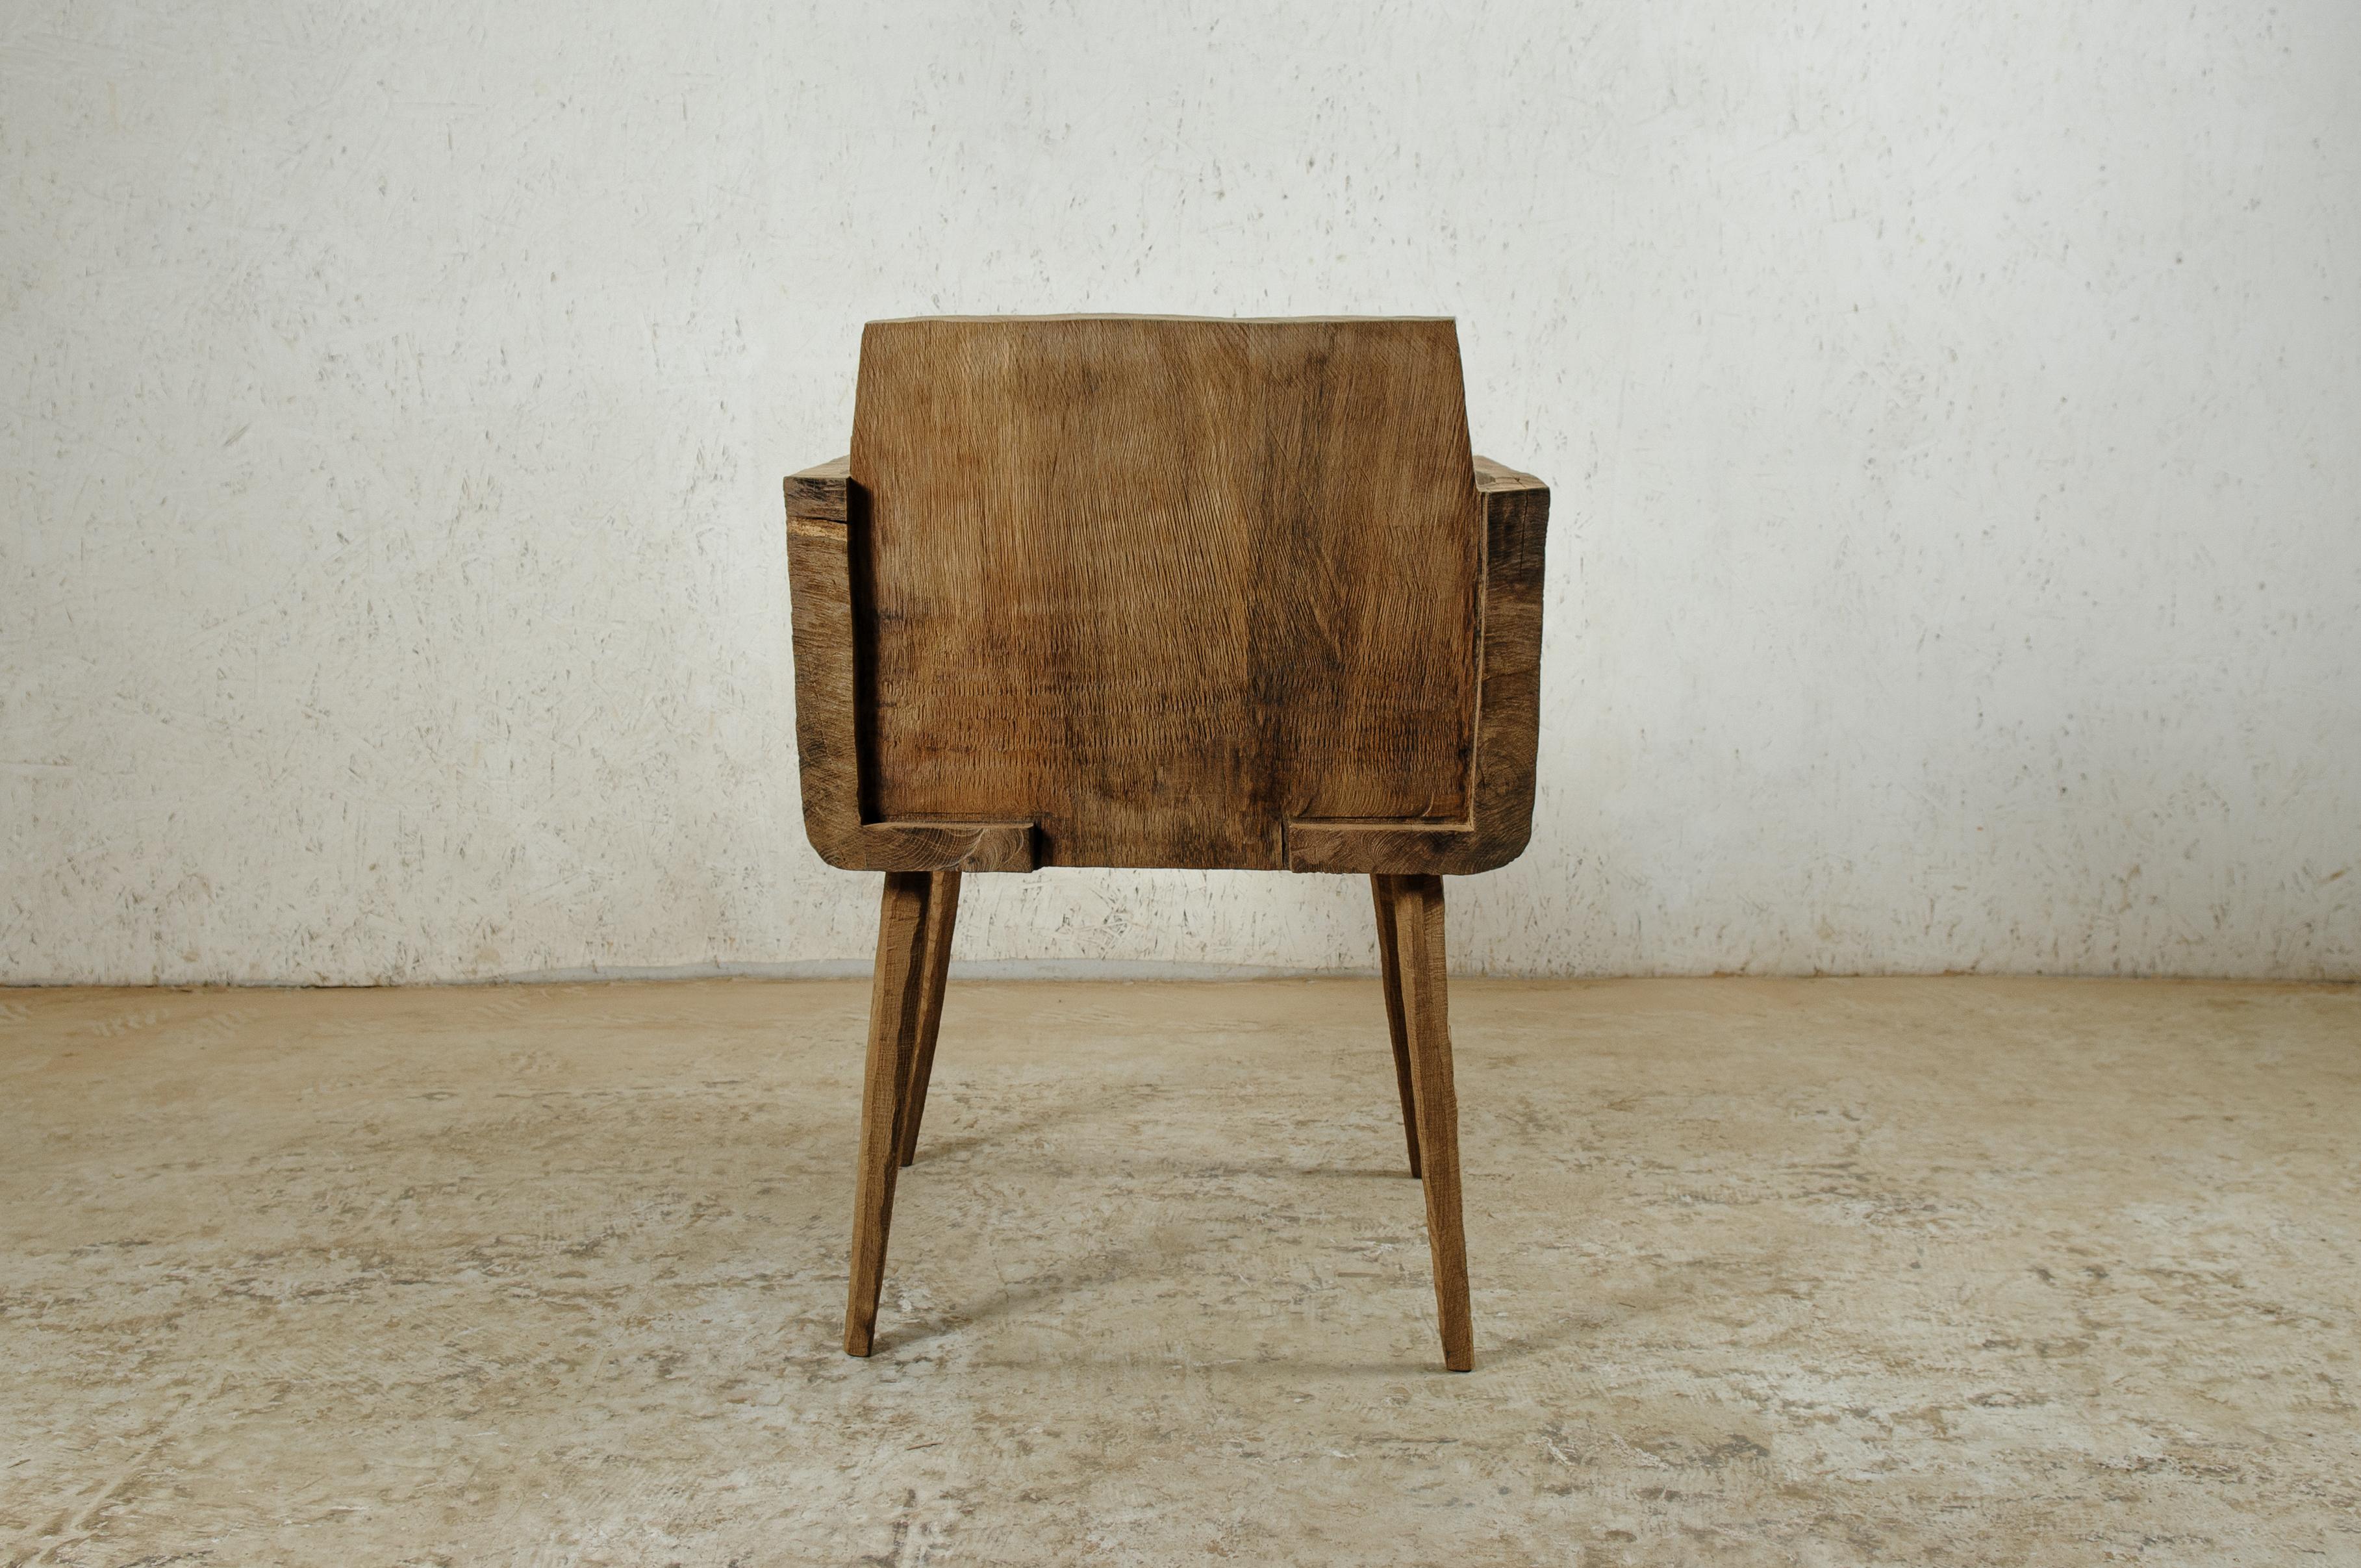 Sculpted Armchair in Solid Oak Wood '4 Legs' For Sale 1